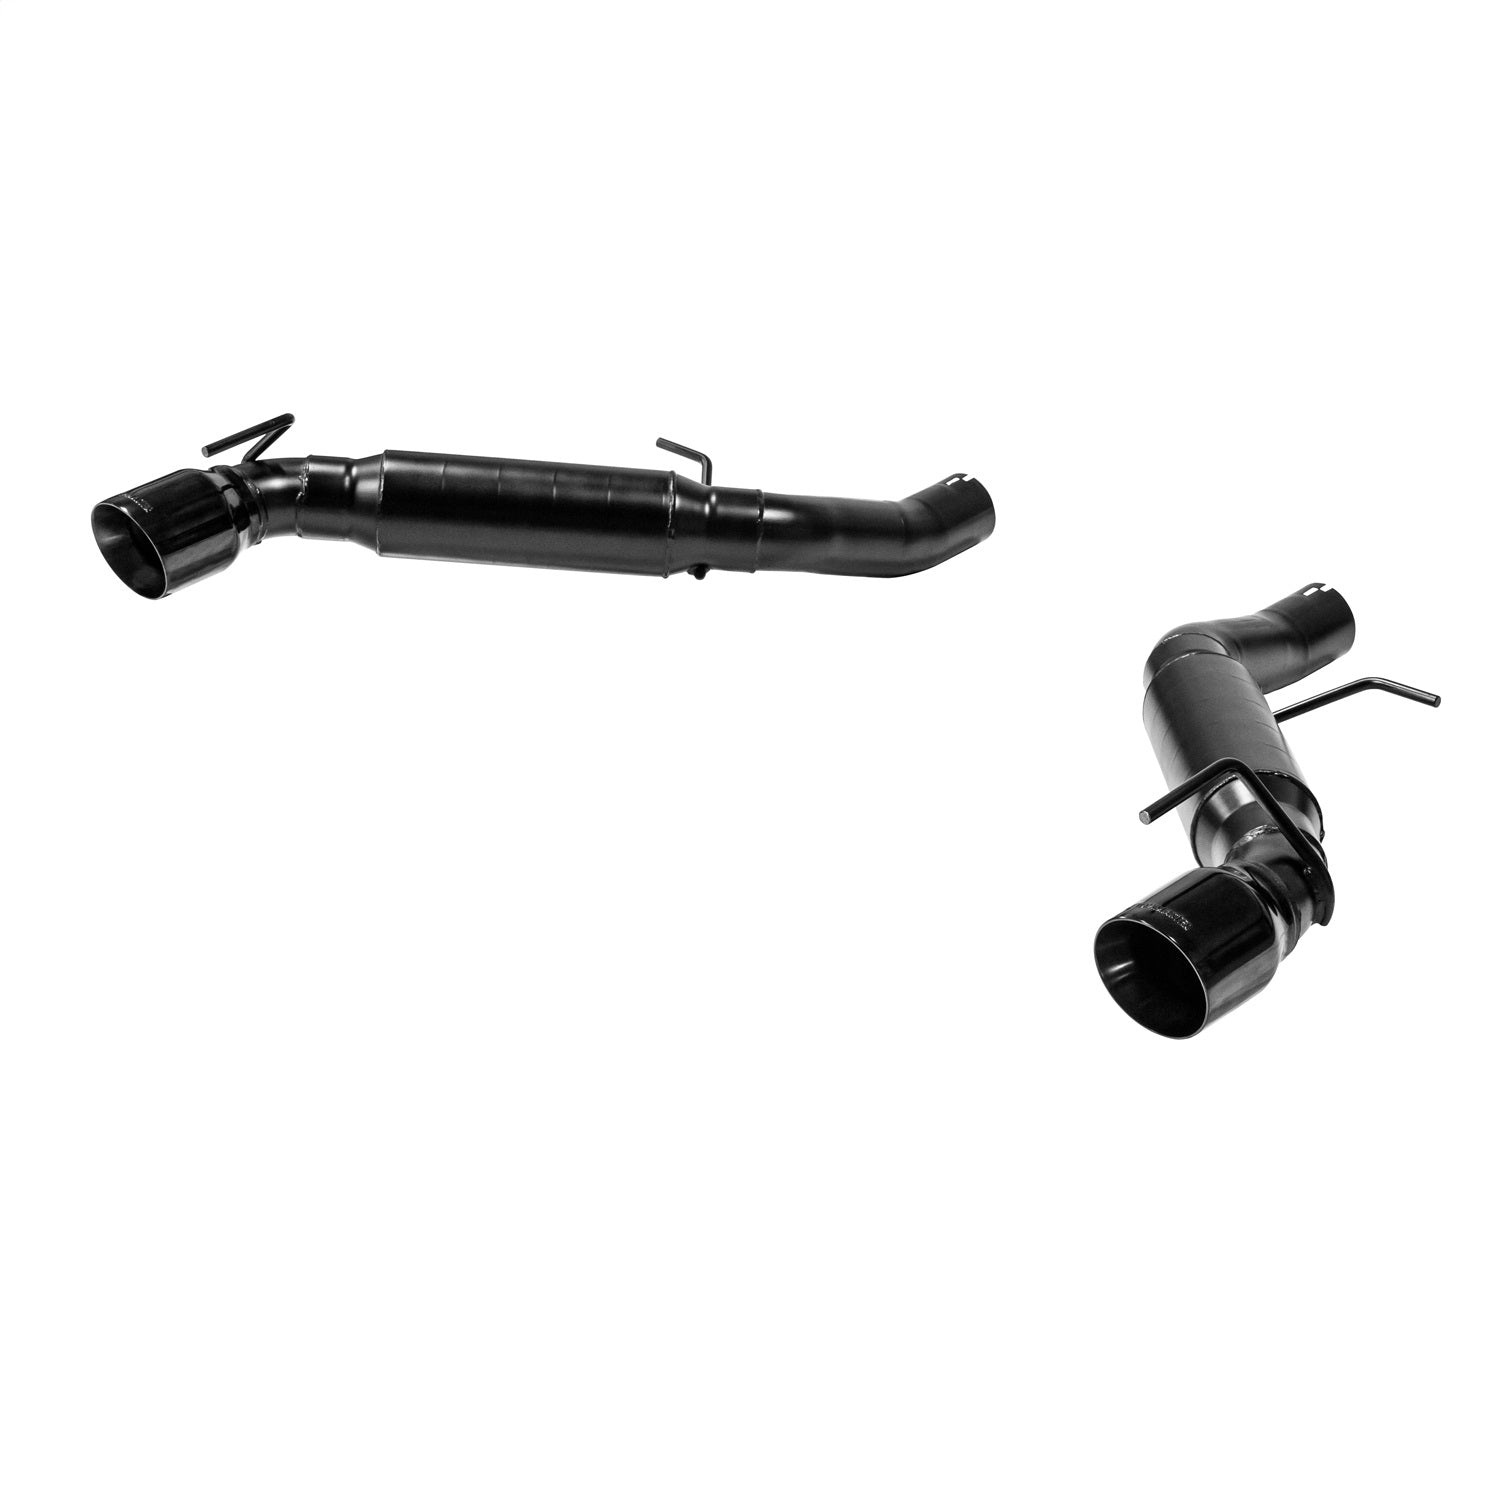 Flowmaster 817745 Outlaw Series Axle Back Exhaust System Fits 16-21 Camaro